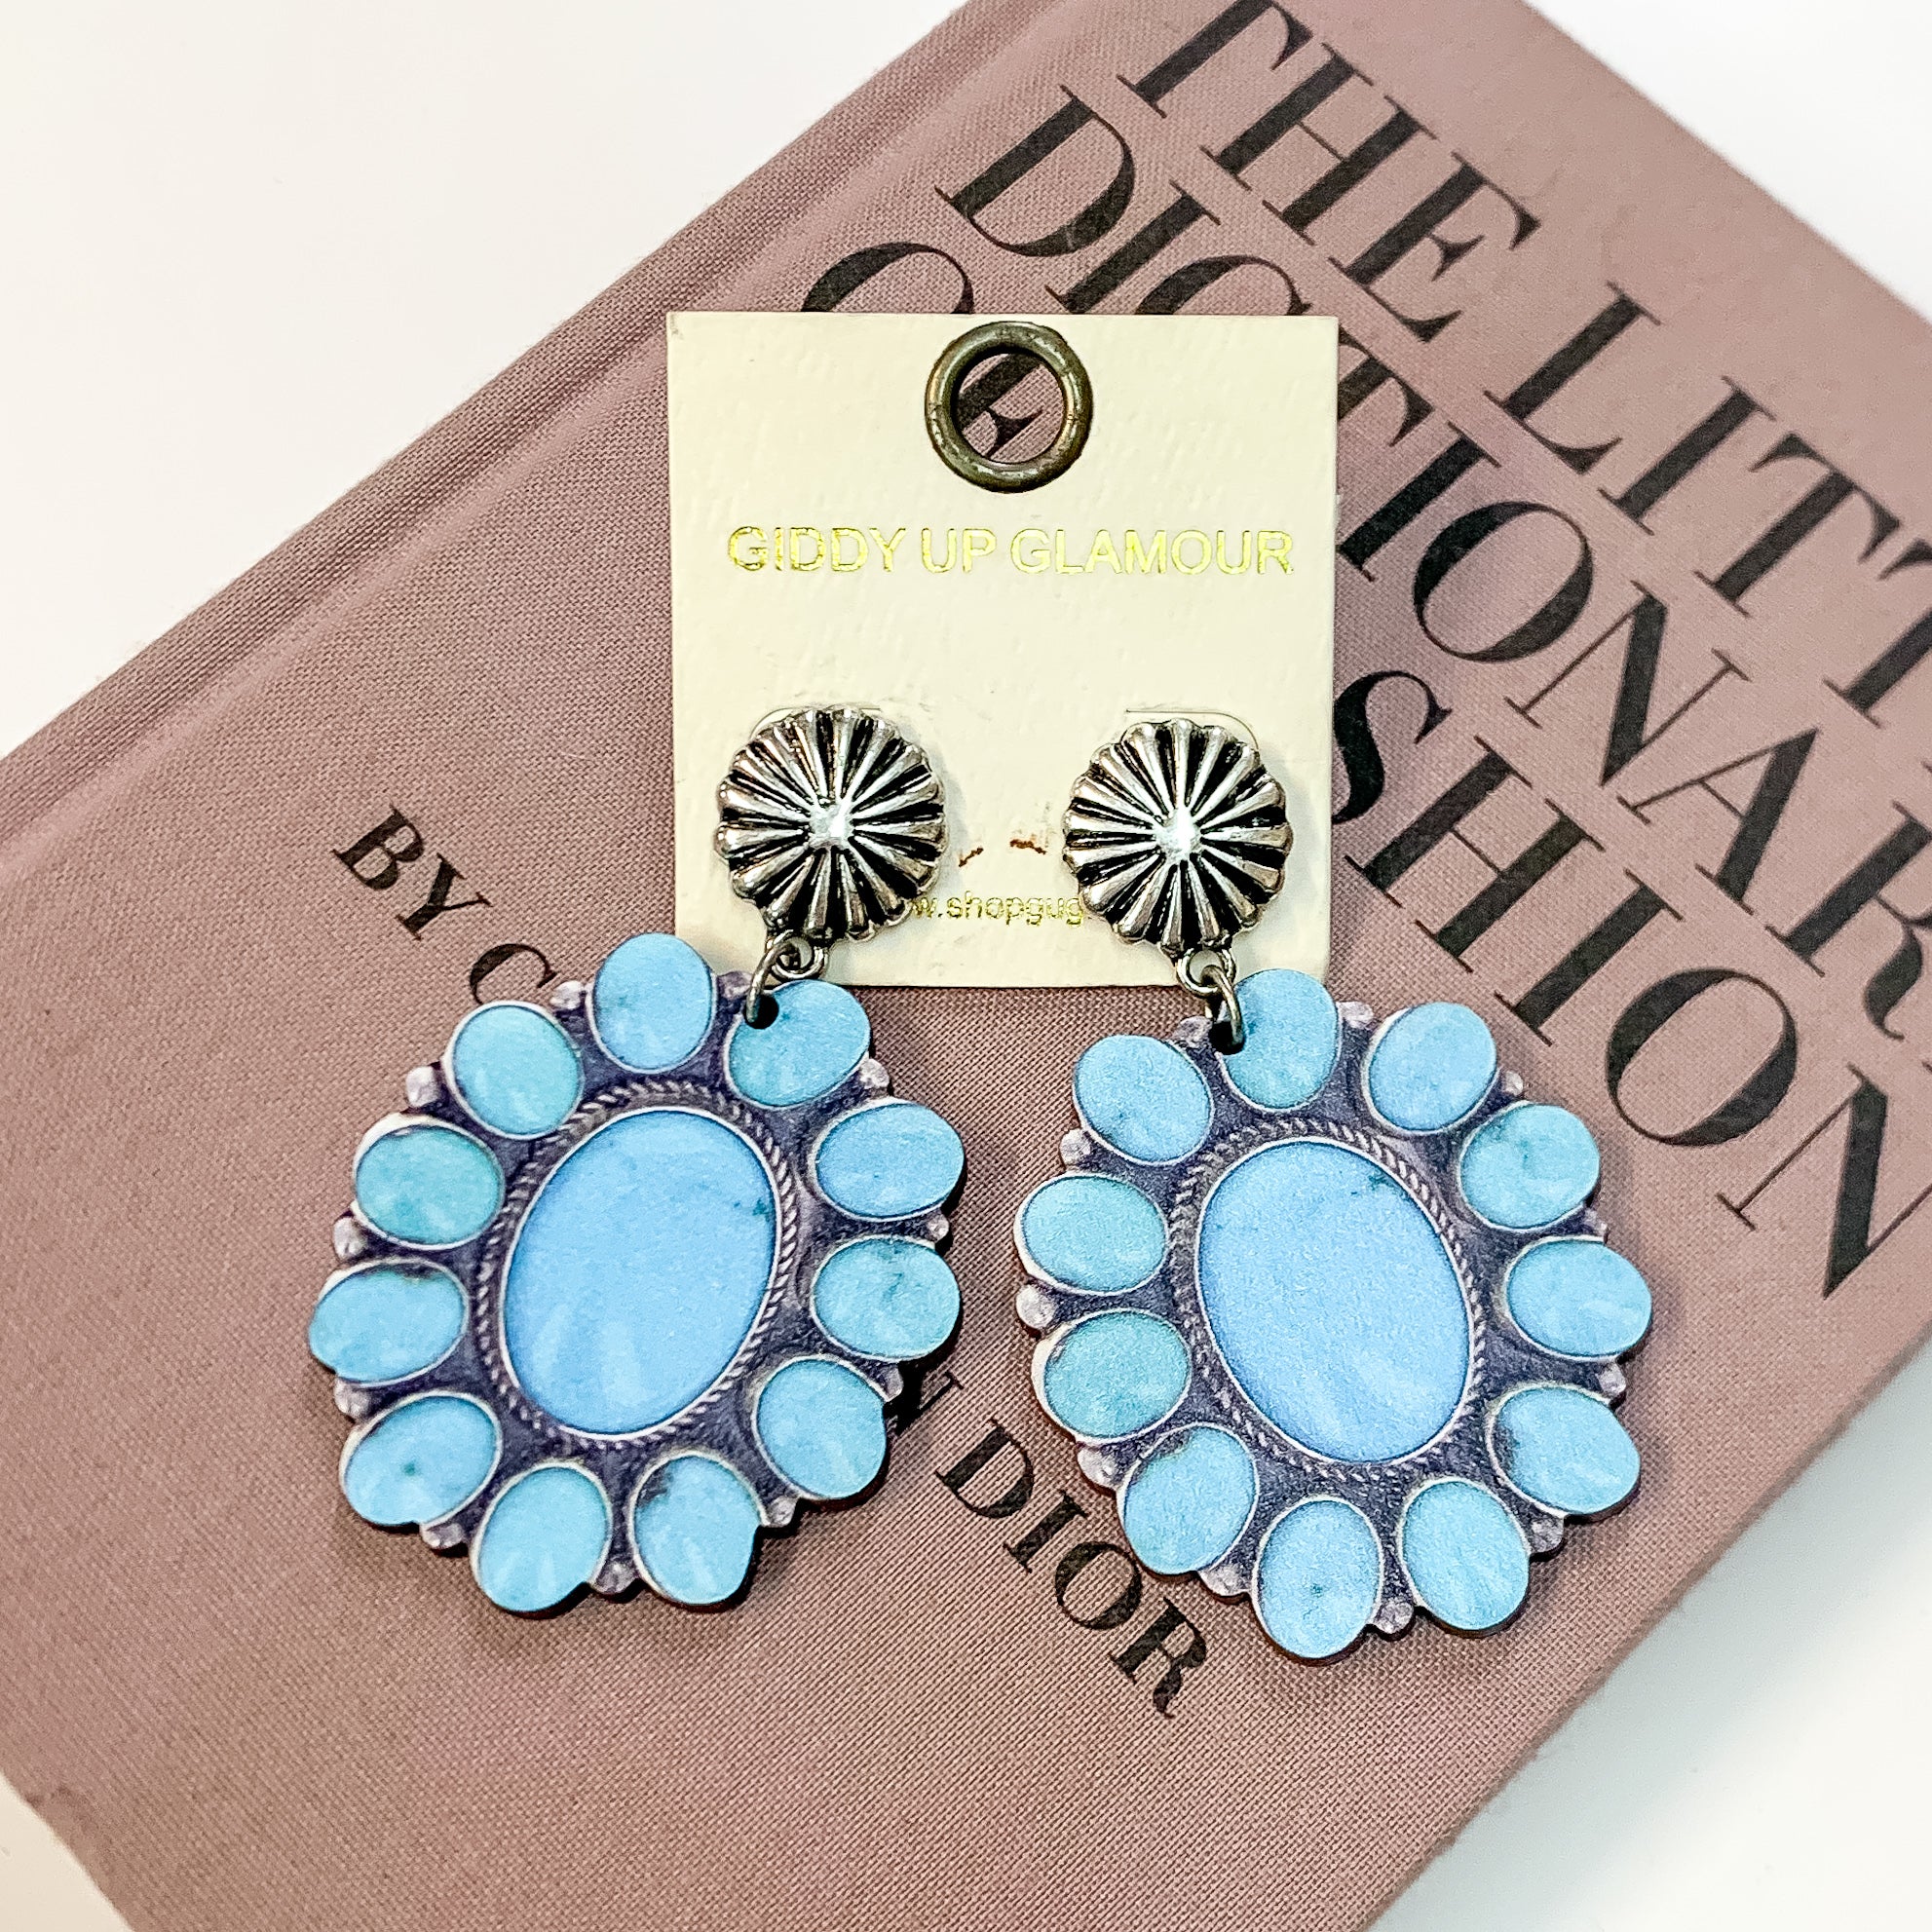 Western Wood Concho Post Earrings in Turquoise Blue - Giddy Up Glamour Boutique